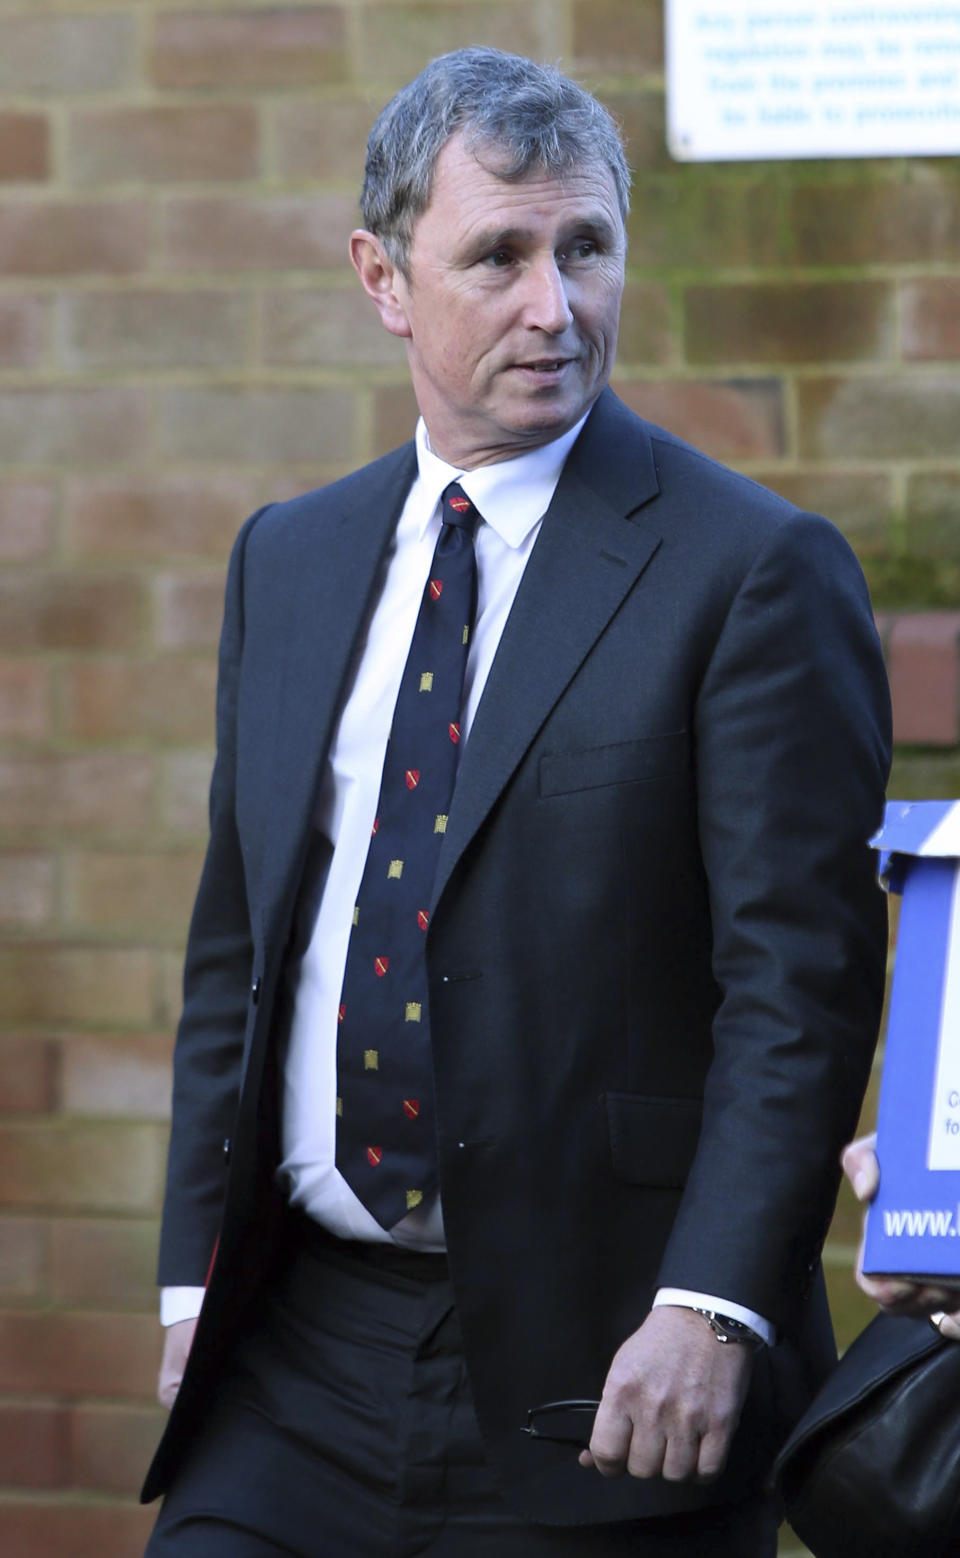 Former Deputy Speaker of Britain's House of Commons Nigel Evans, arrives at Preston Crown Court where he faces nine charges of alleged sexual offences against seven men, at court in Preston, England, Monday March 10, 2014. Evans denies all the alleged offences, which date from 2002 till 2013. (AP Photo / Peter Byrne, PA) UNITED KINGDOM OUT - NO SALES - NO ARCHIVES